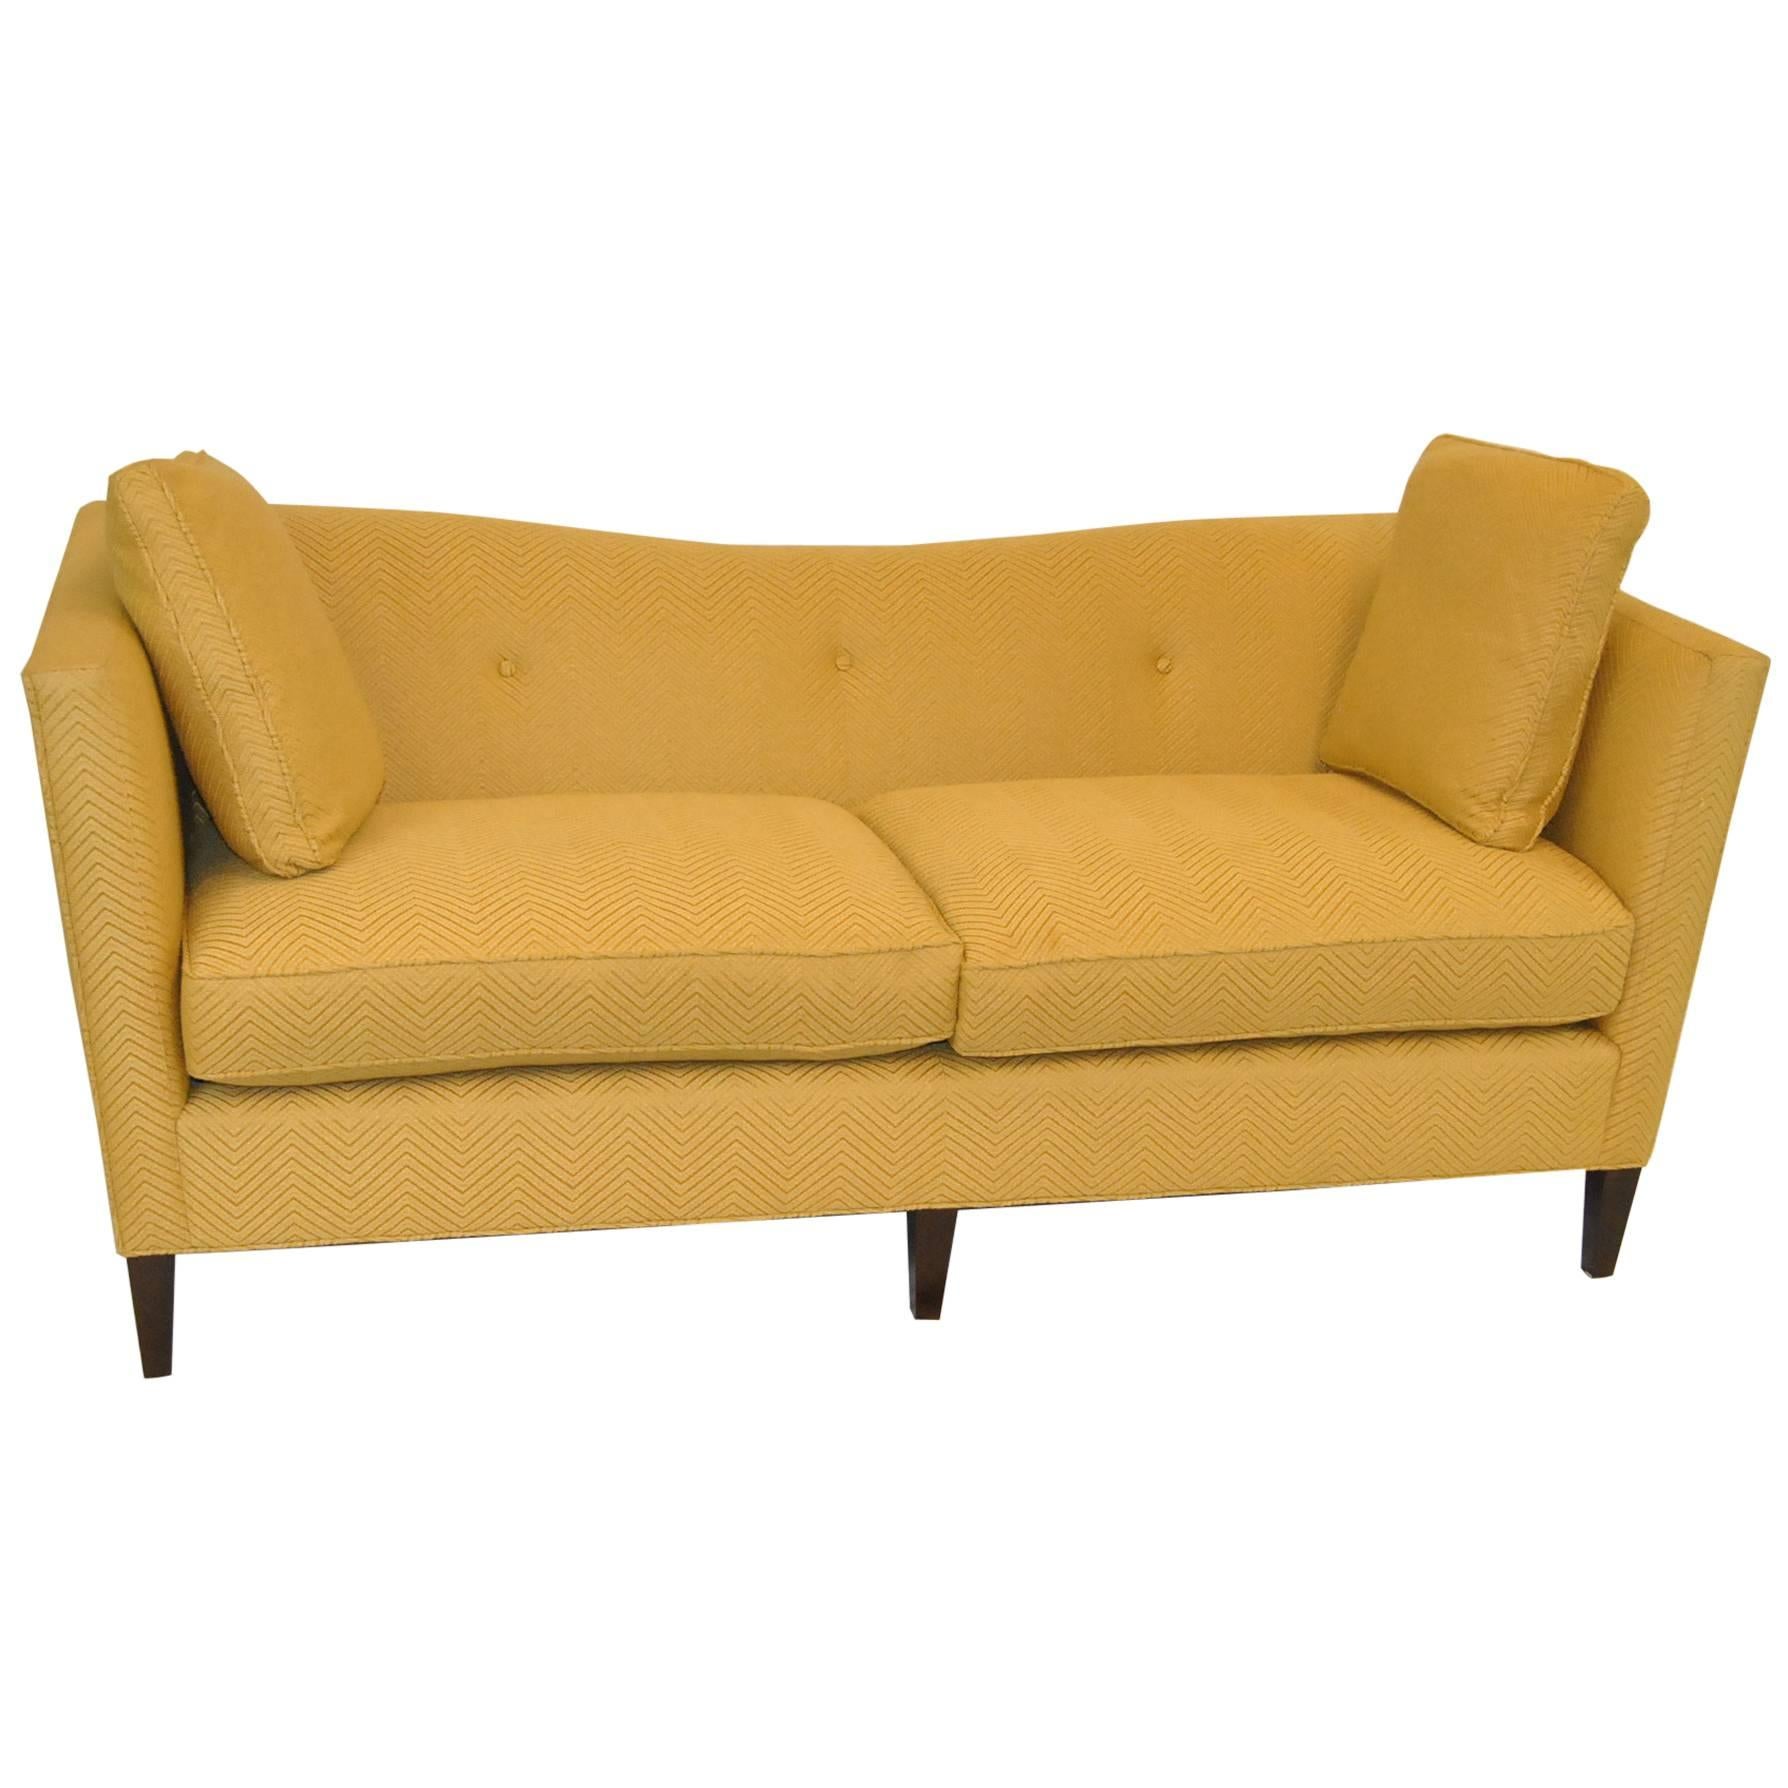 French Tuxedo Butter Yellow Sofa by Baker Furniture, Baker Classic Collection